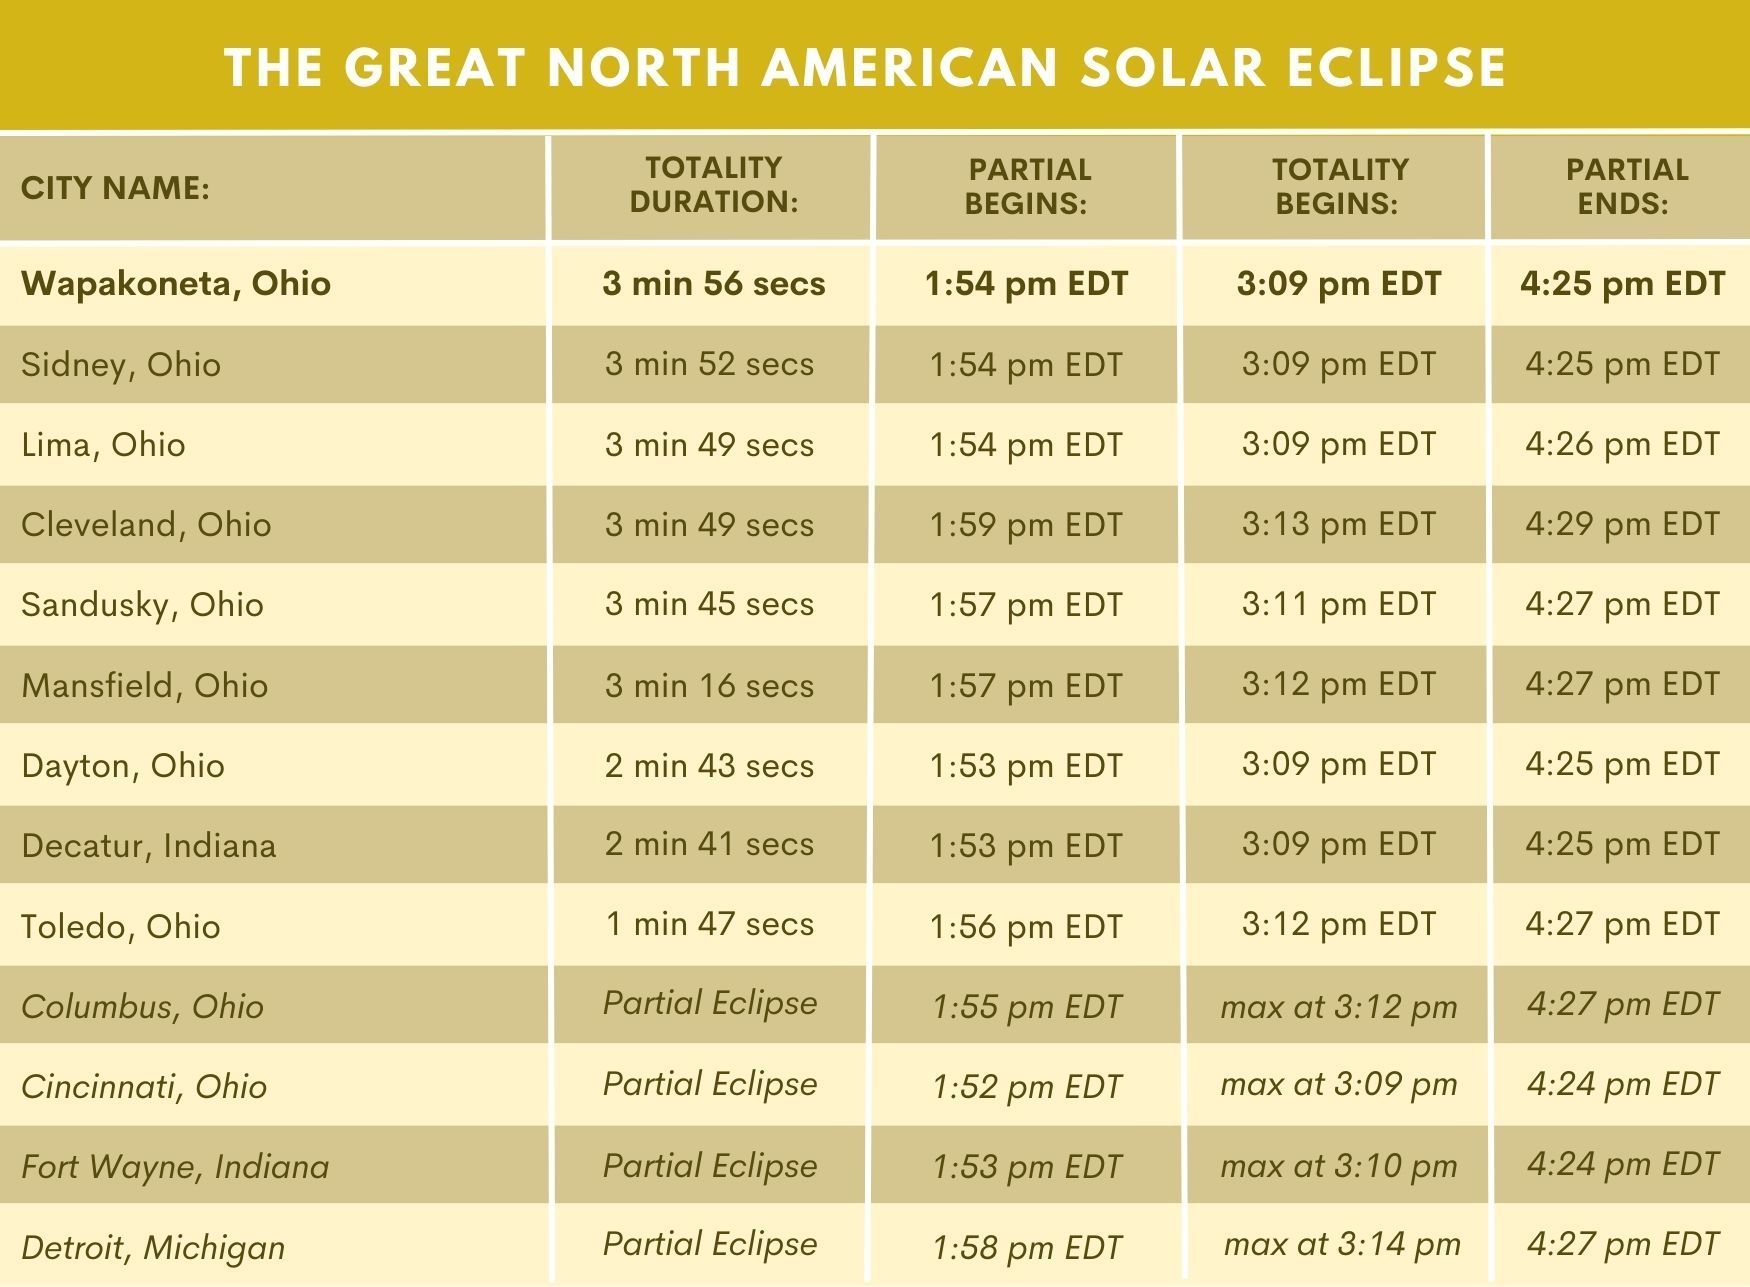 A table showing the great north american solar eclipse